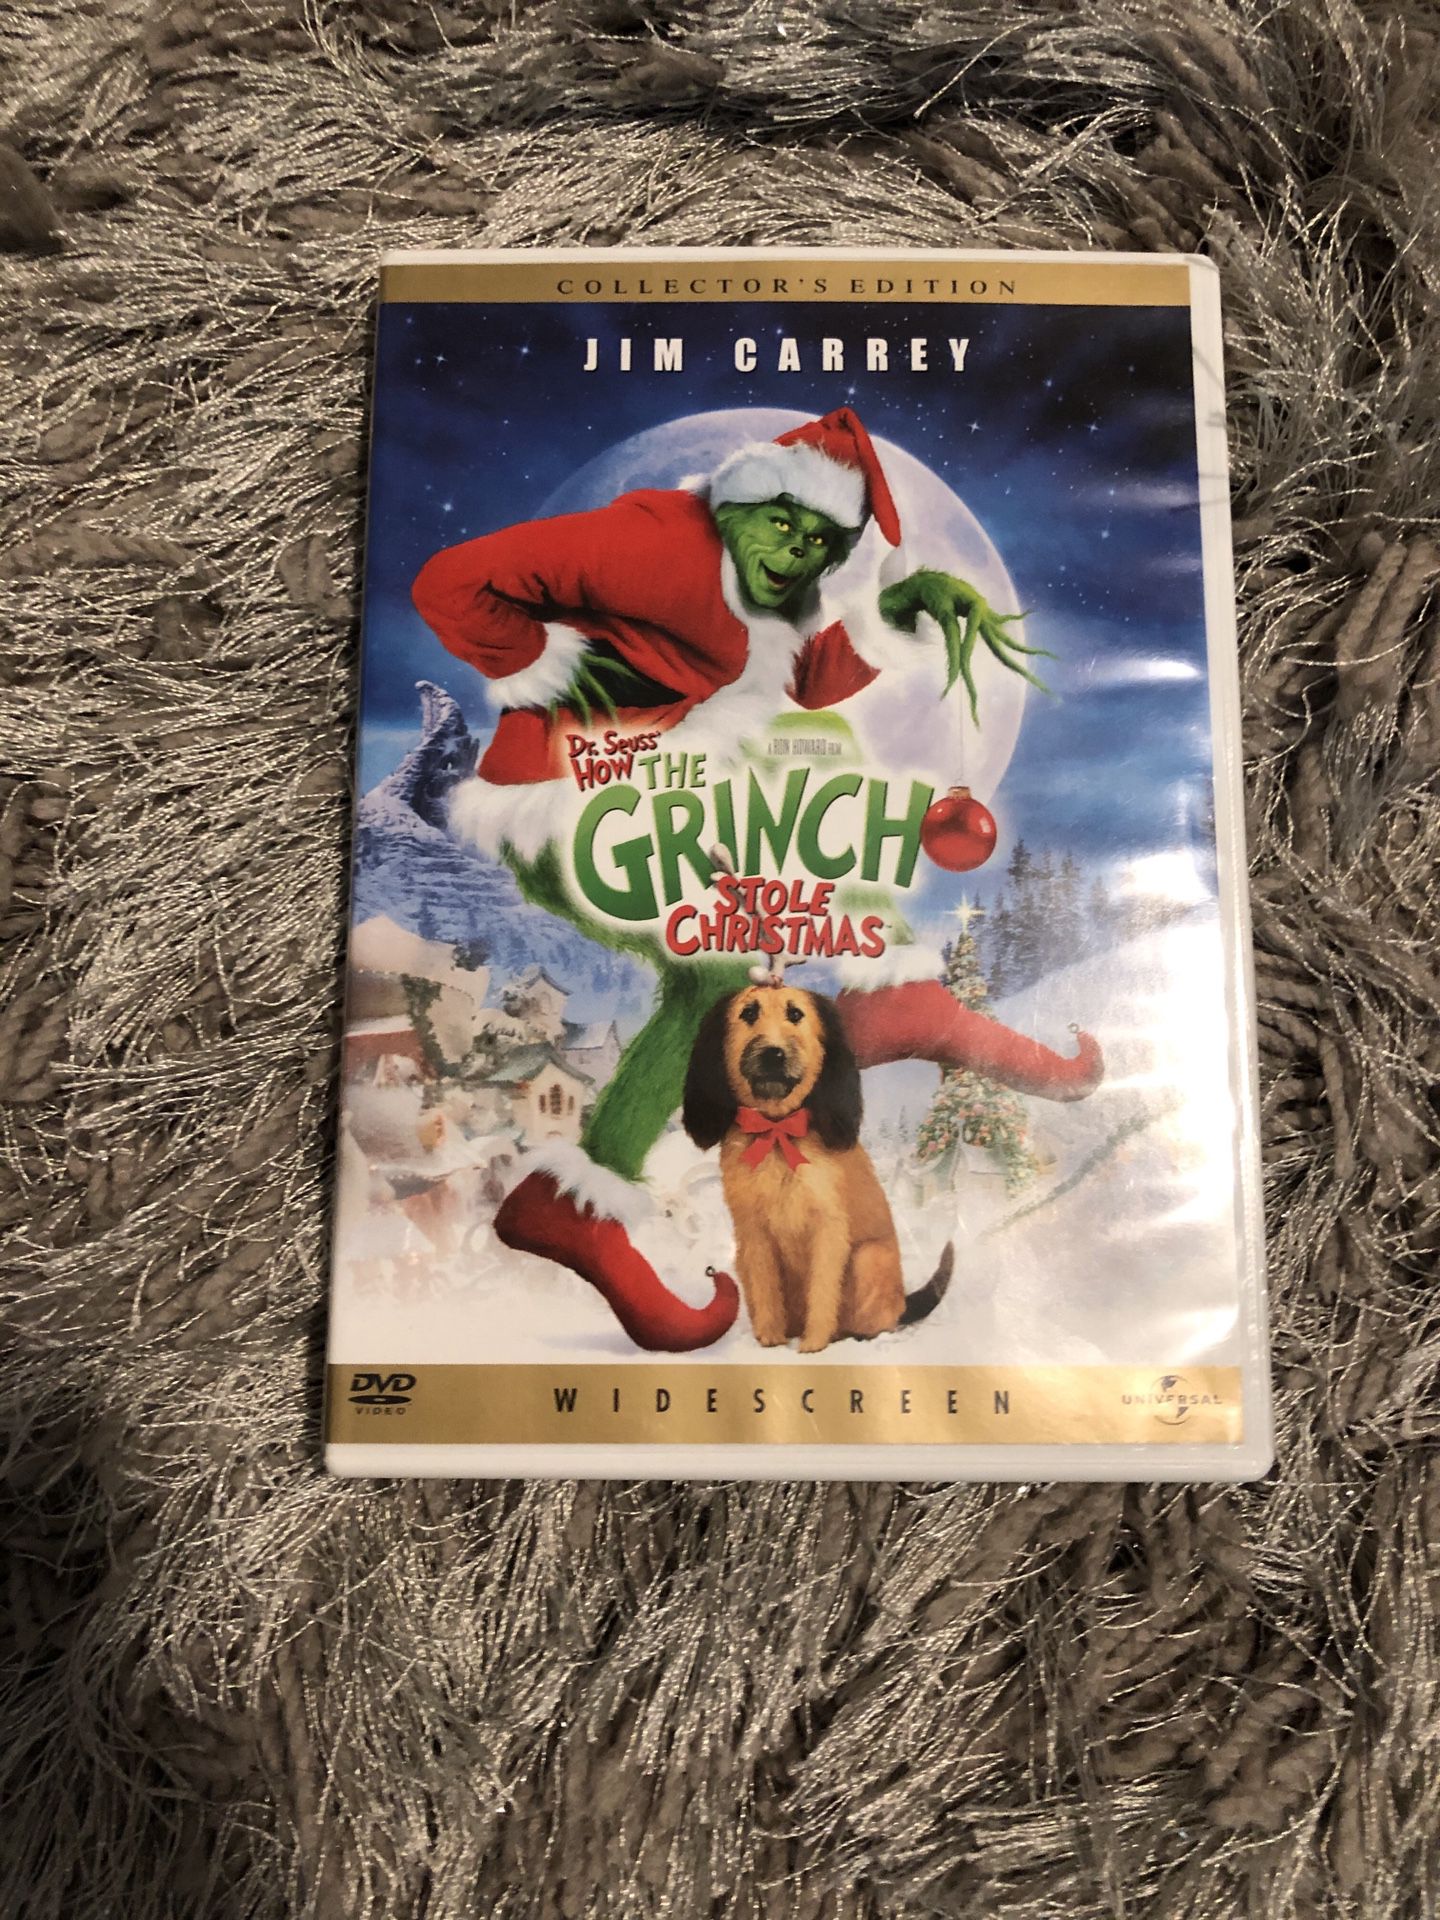 How the grinch stole Christmas dvd